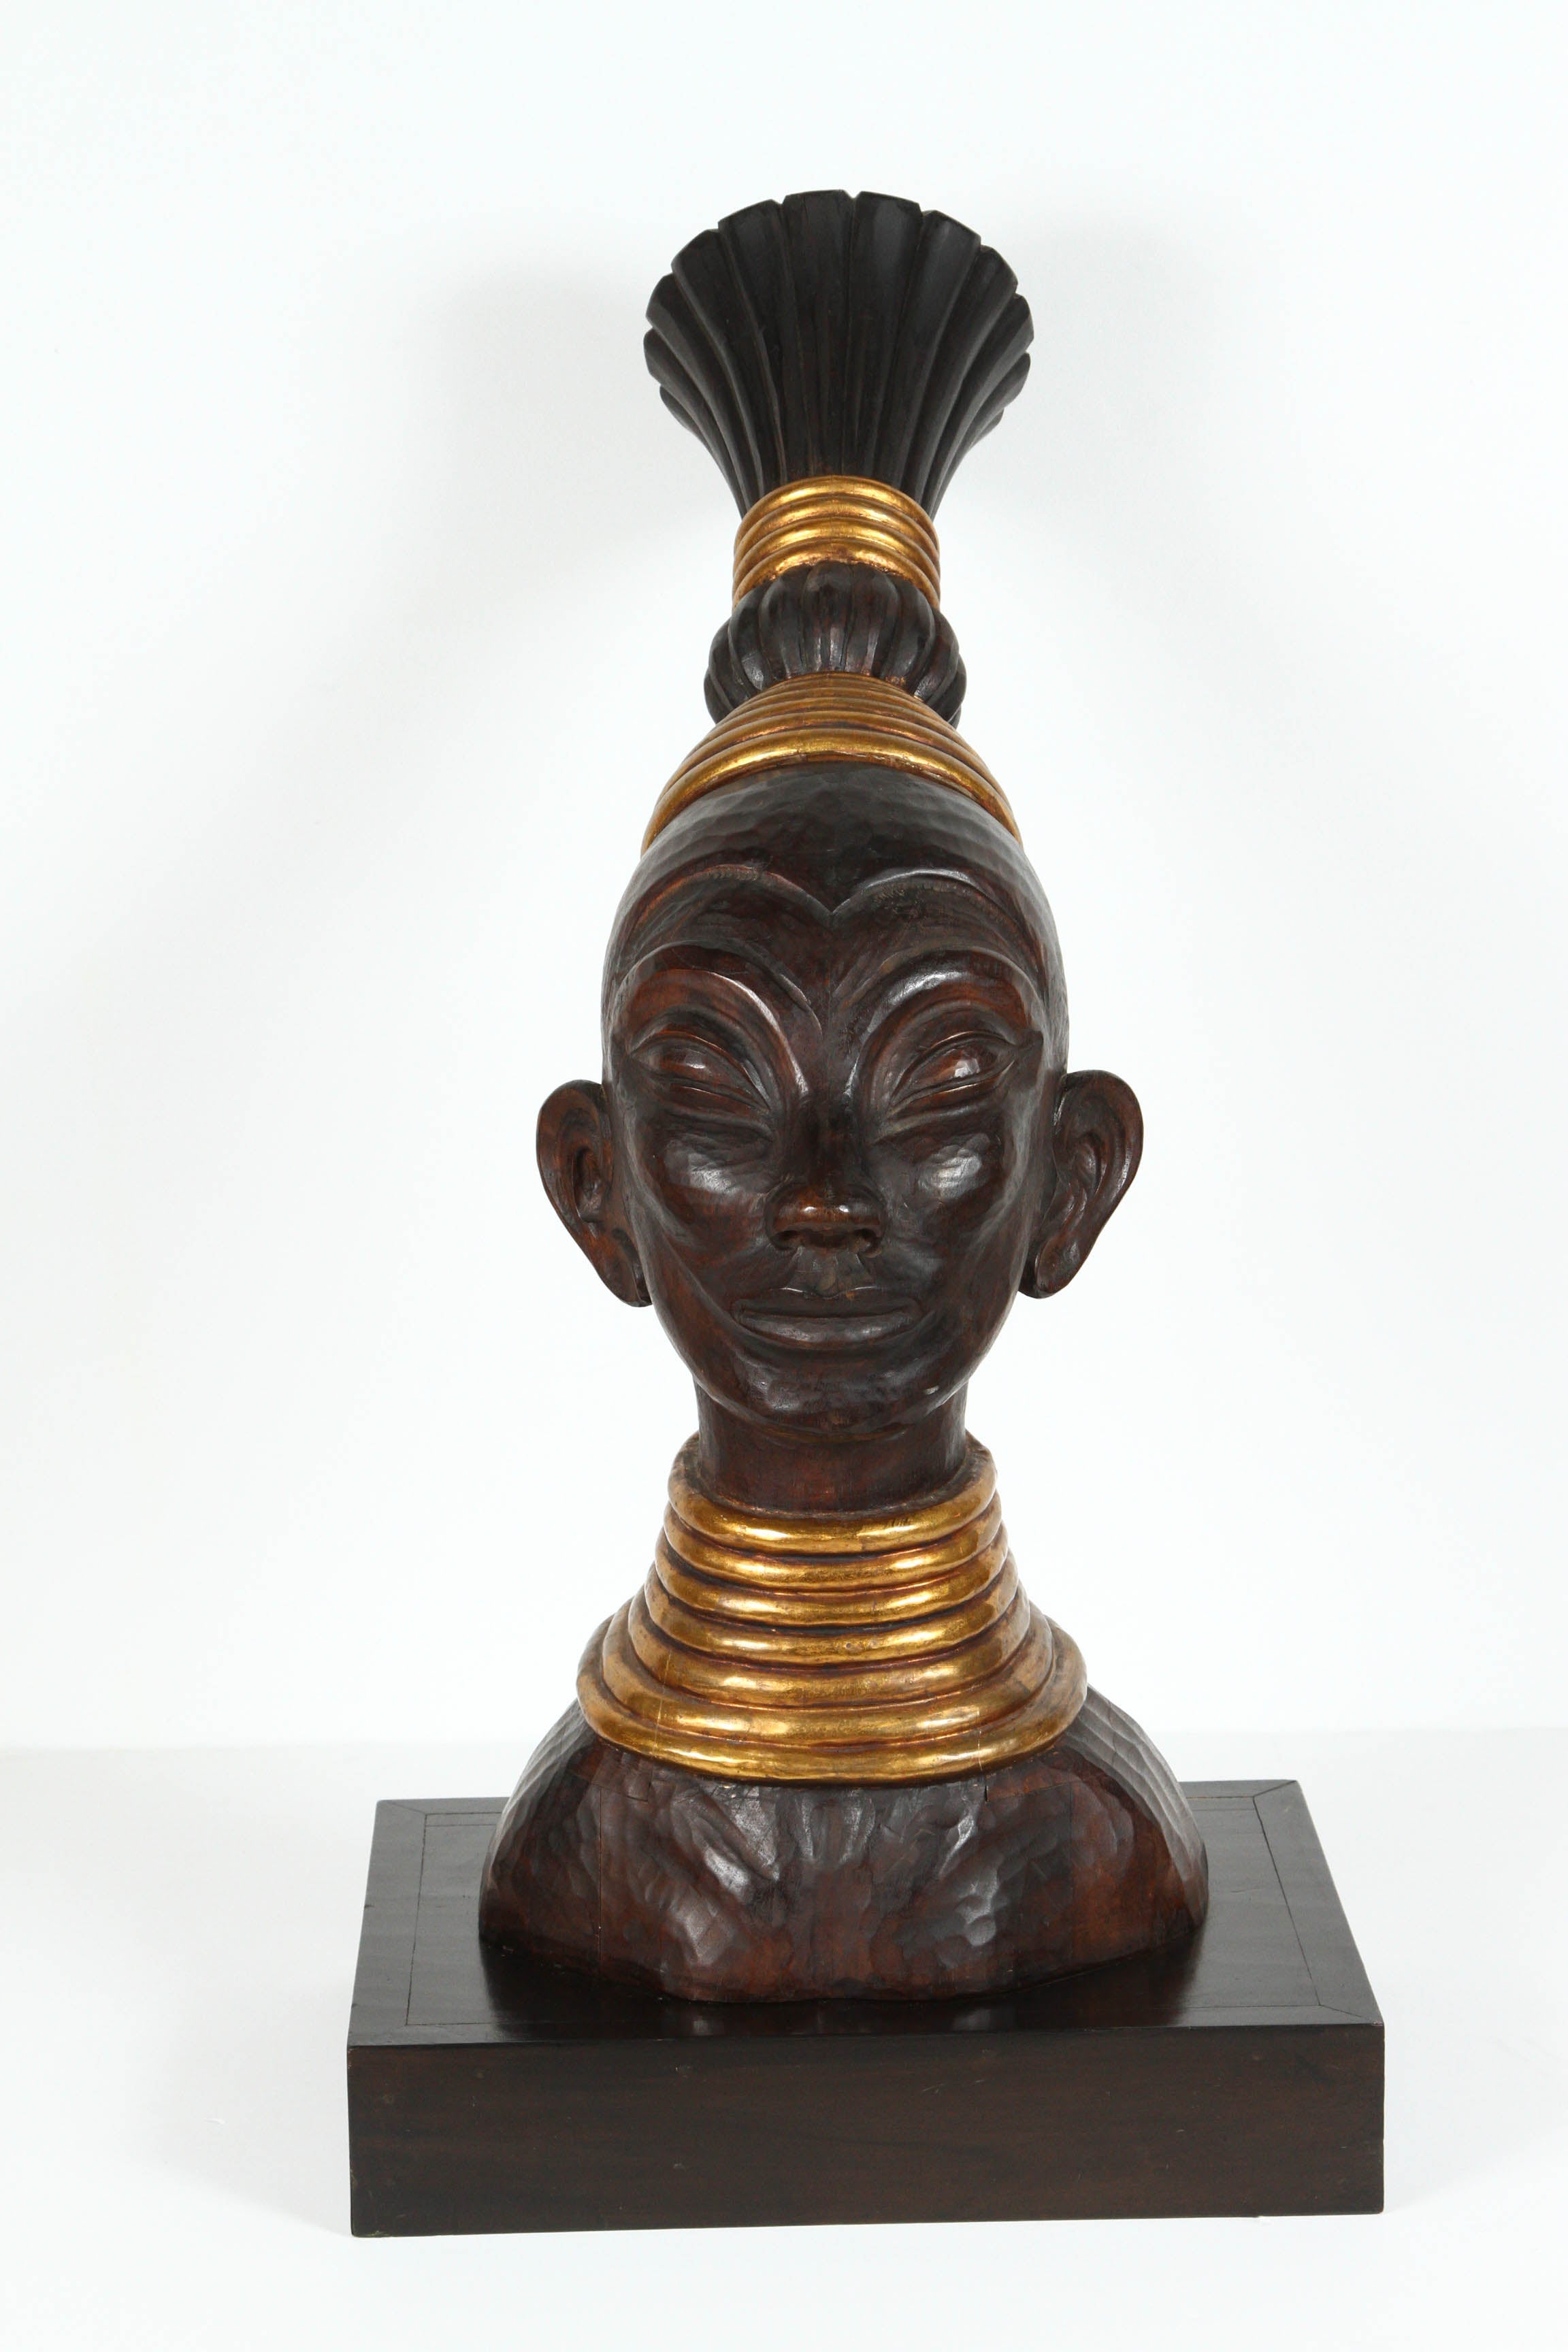 South African Zulu Wooden Tribal Contemporary Sculpture of Black African Male Bust